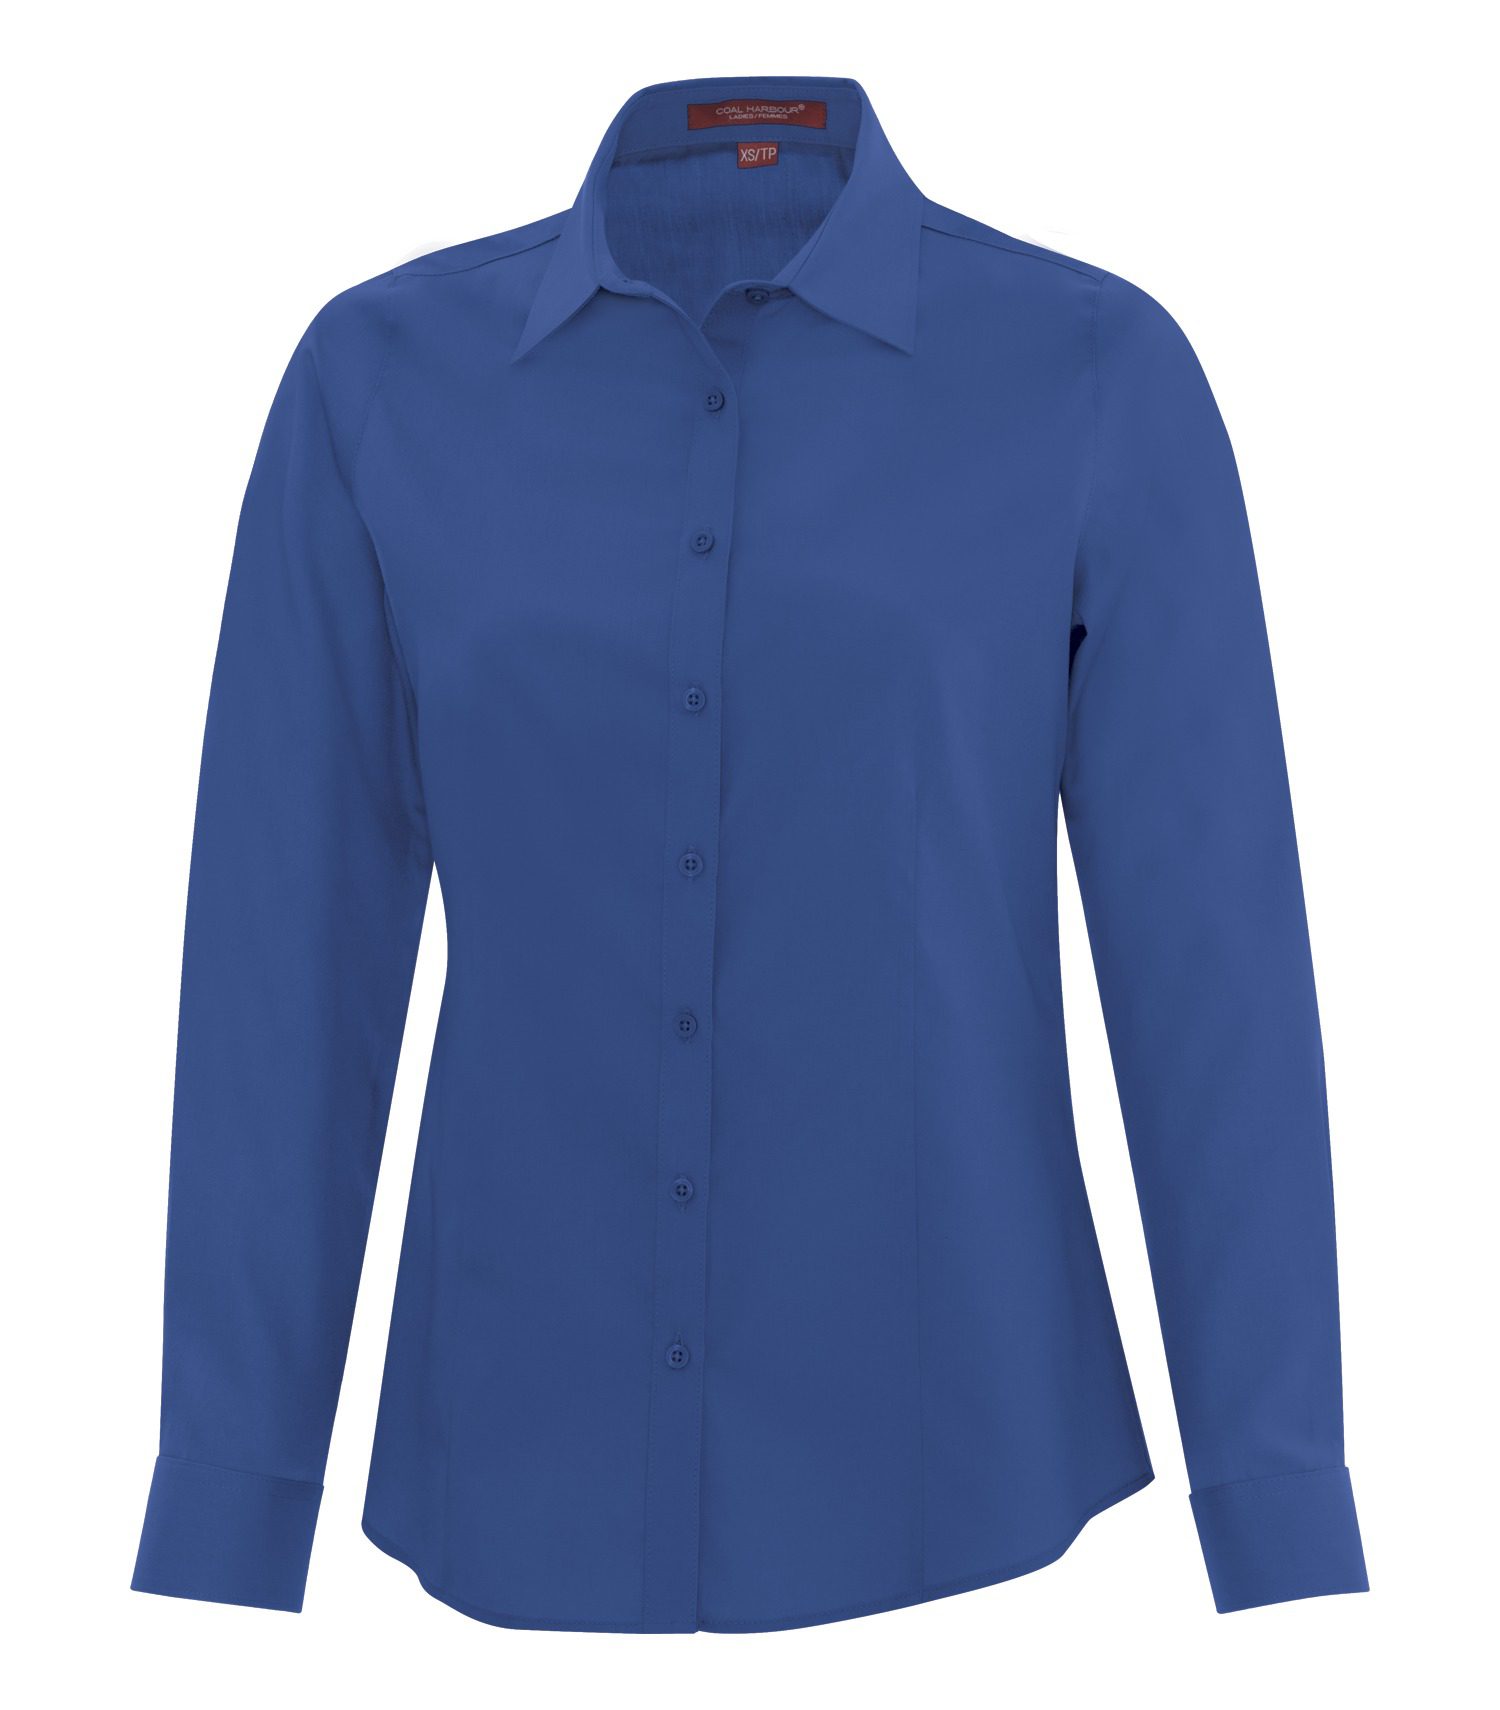 COAL HARBOUR® EVERYDAY LONG SLEEVE LADIES' WOVEN SHIRT #L6013 Royal Blue